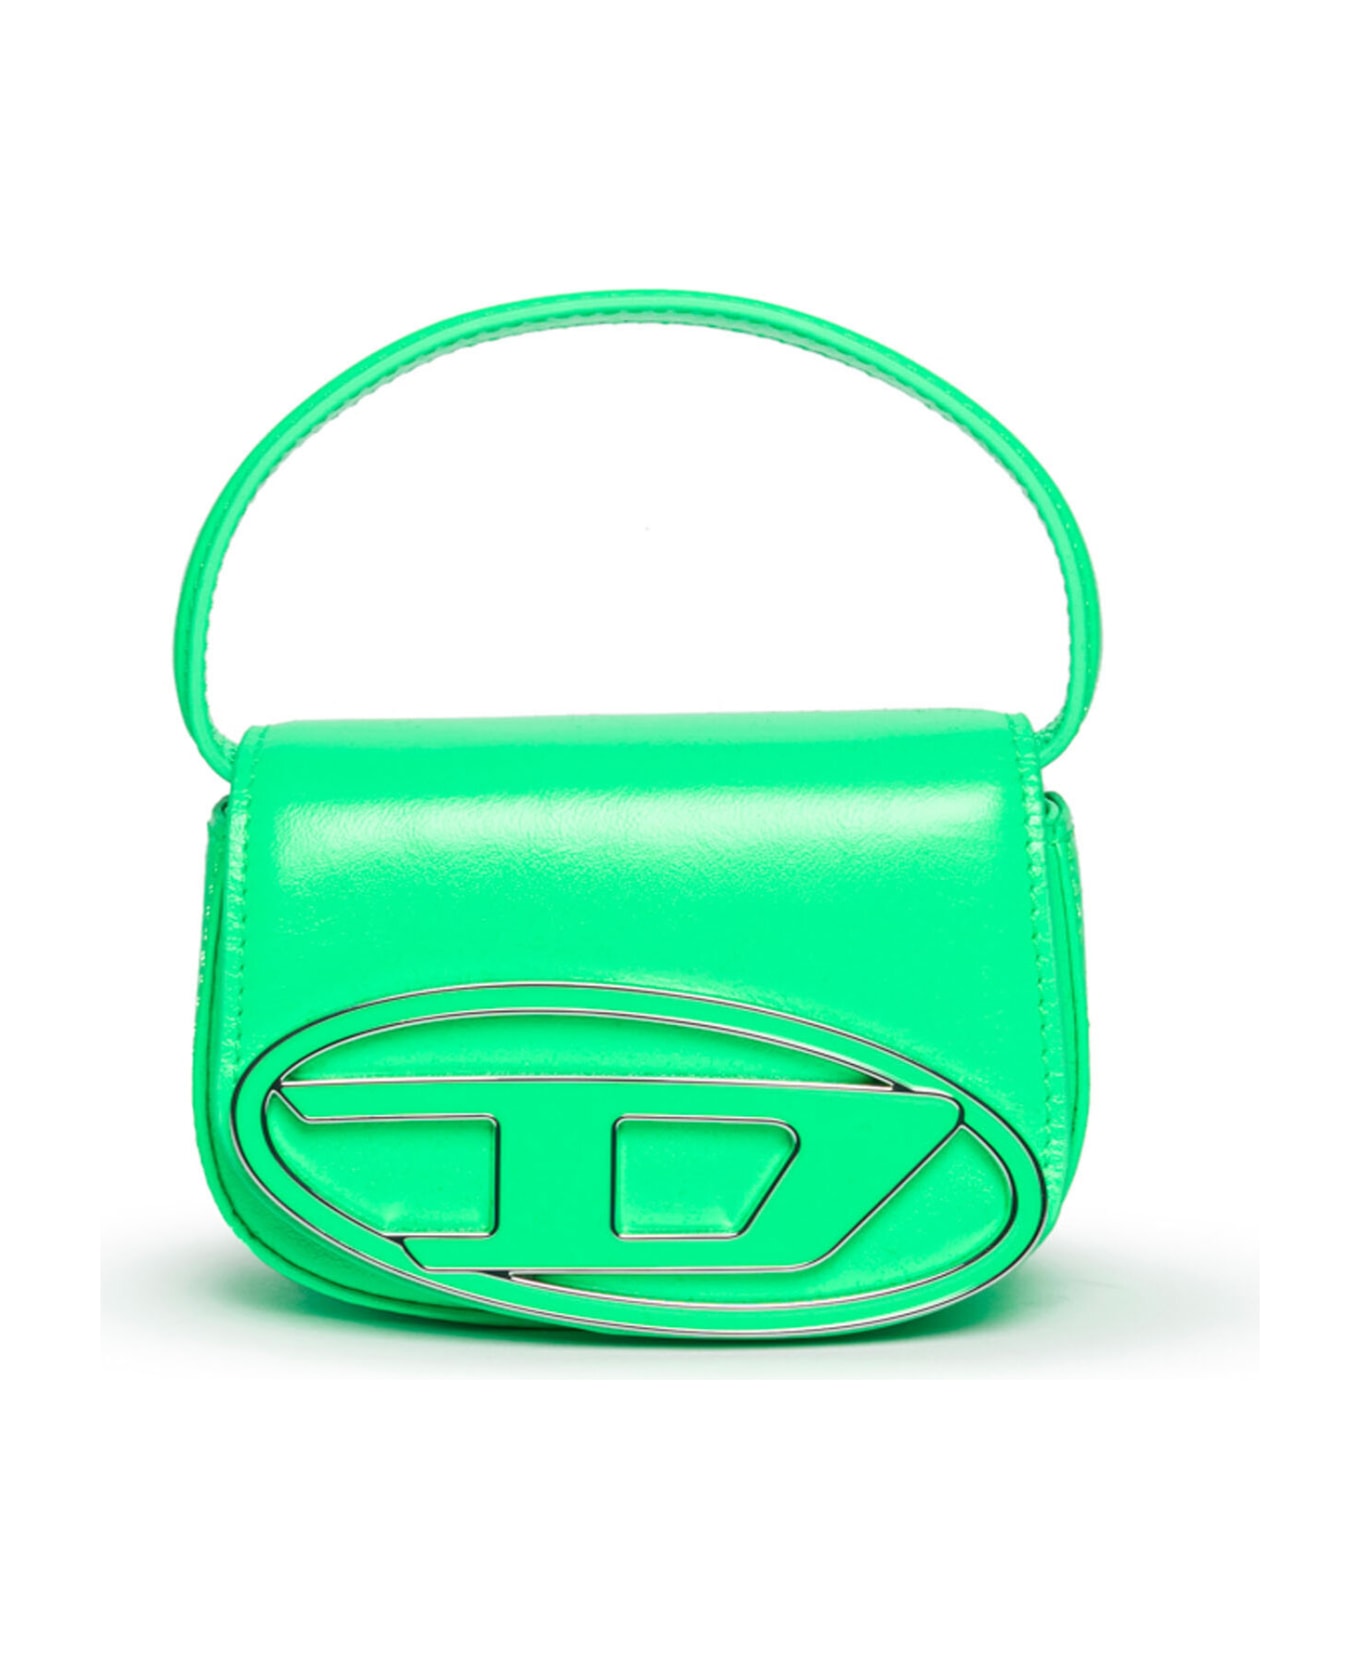 Diesel 1dr Xs Bags Diesel 1dr Xs Bag In Fluo Imitation Leather - Green アクセサリー＆ギフト